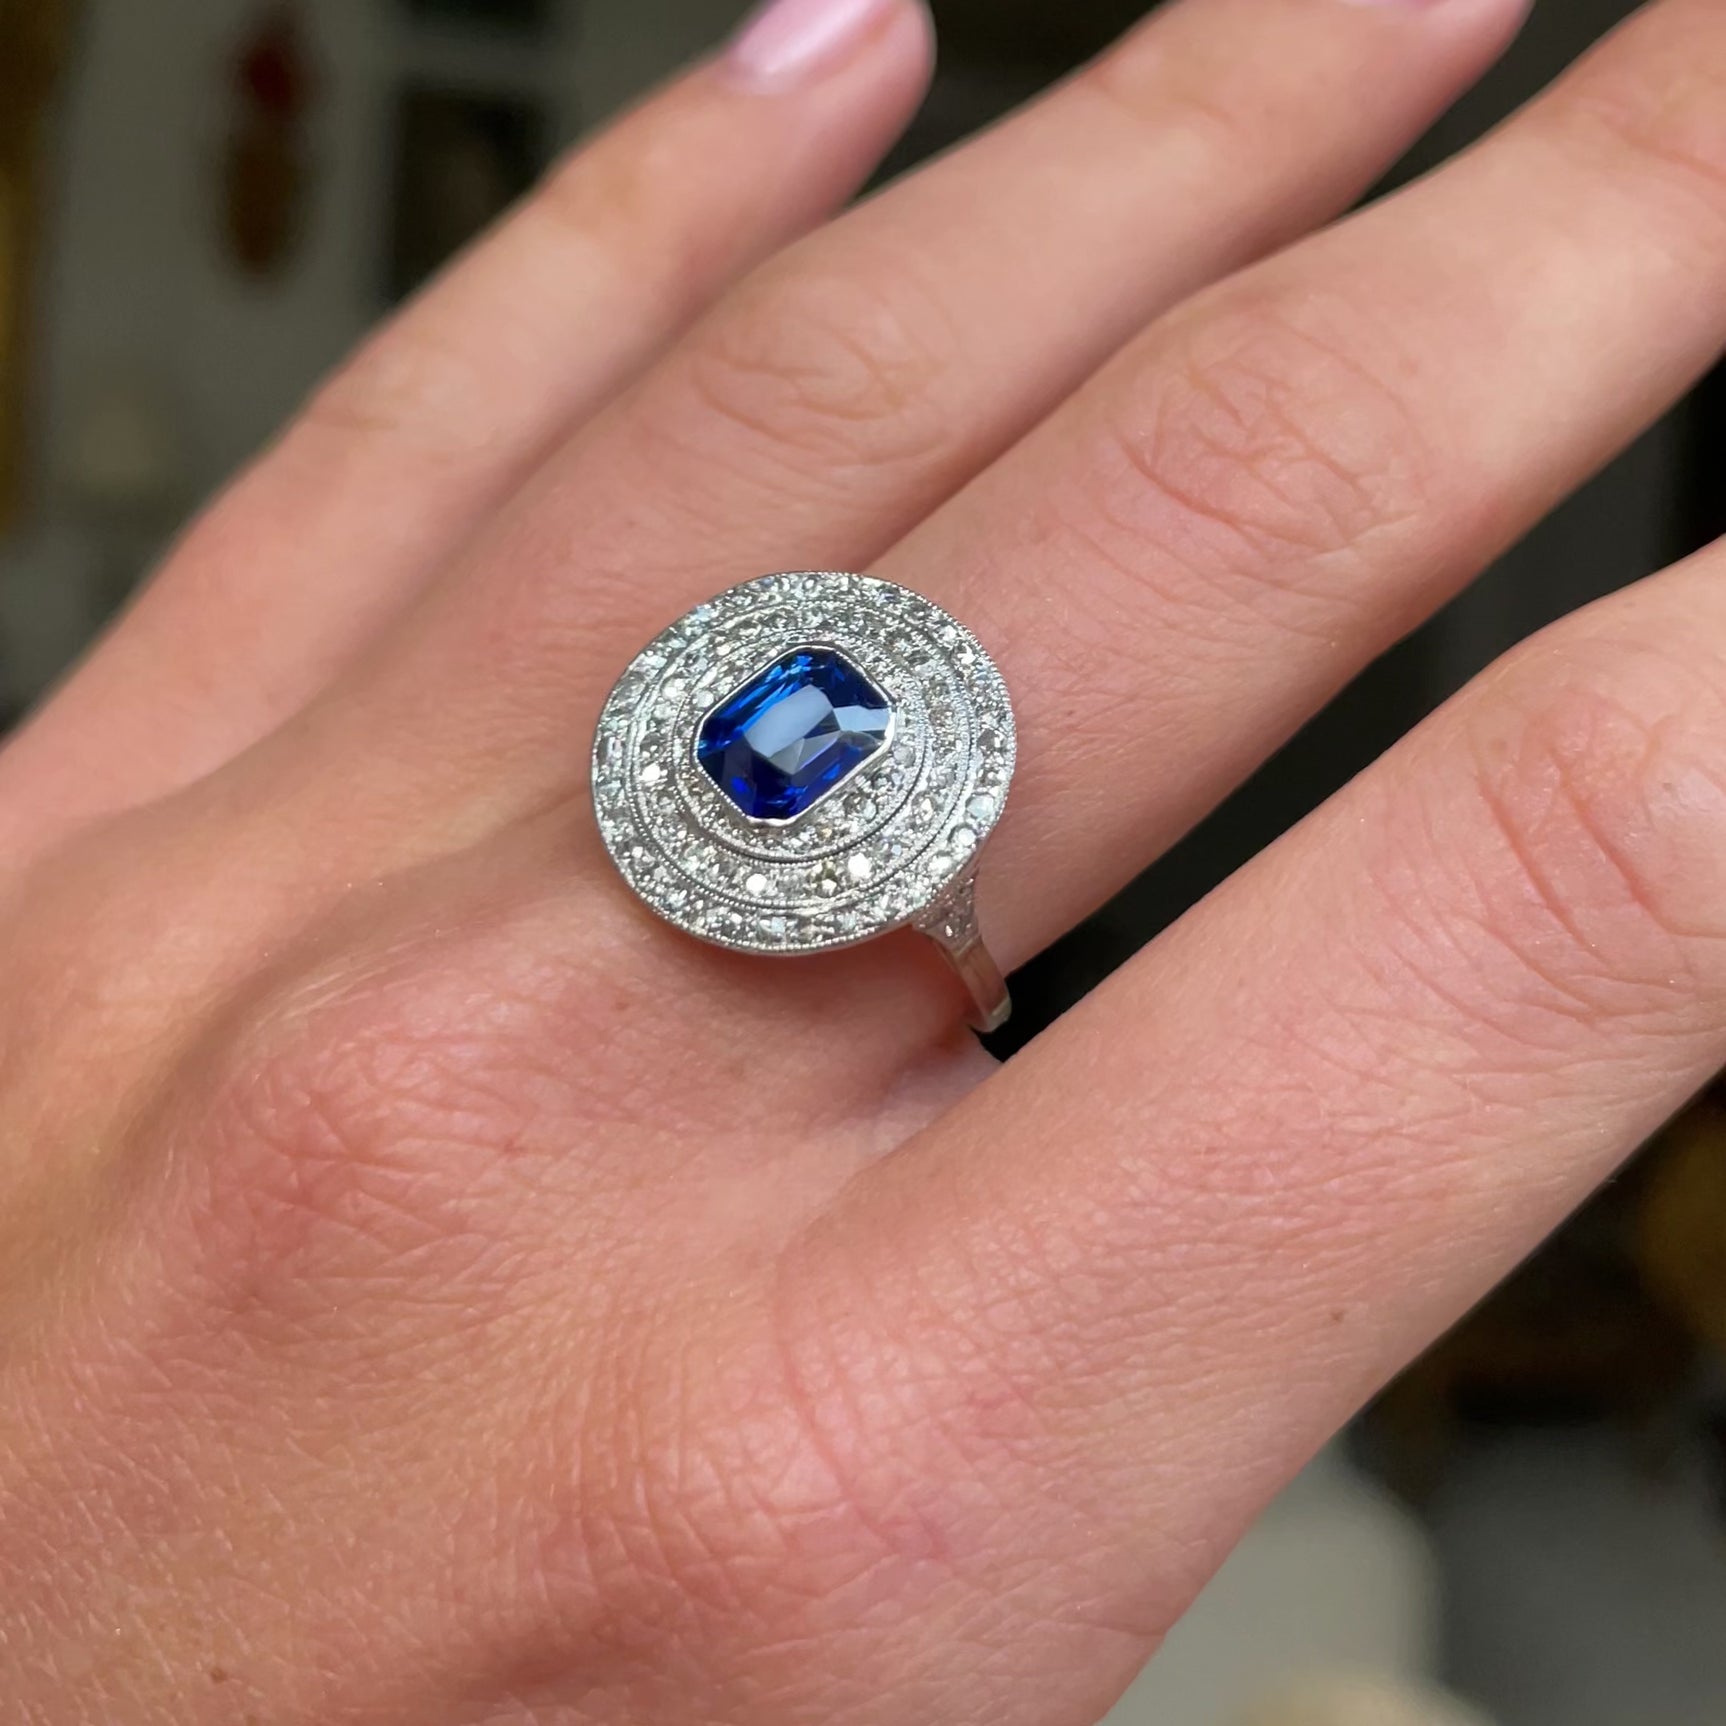 Sapphire and diamond target cluster ring, worn on hand and moved around to give perspective.